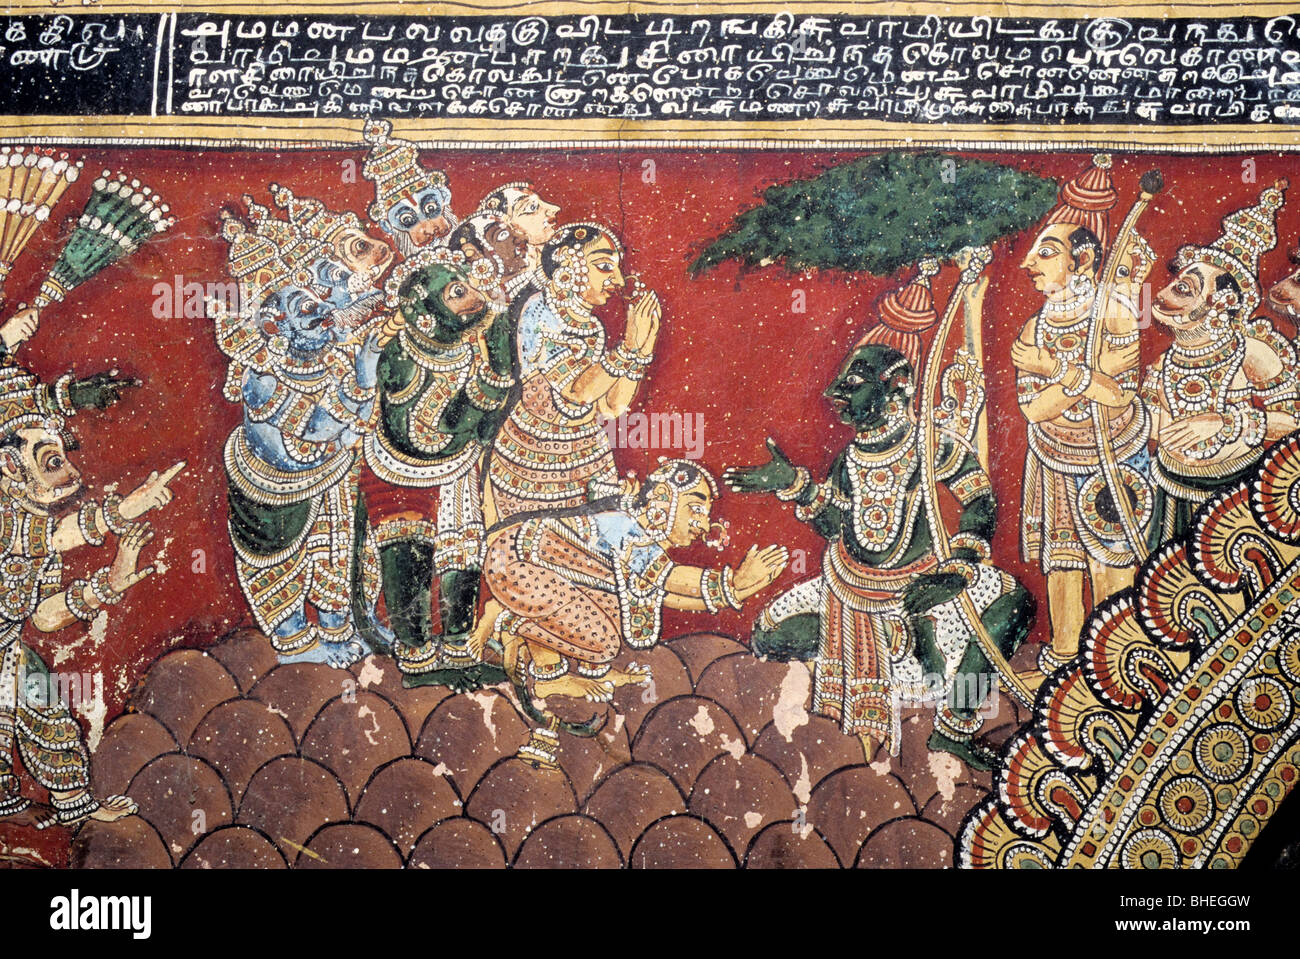 Two hundered year’s old Ramayana murals on the walls in Bodinayakanur